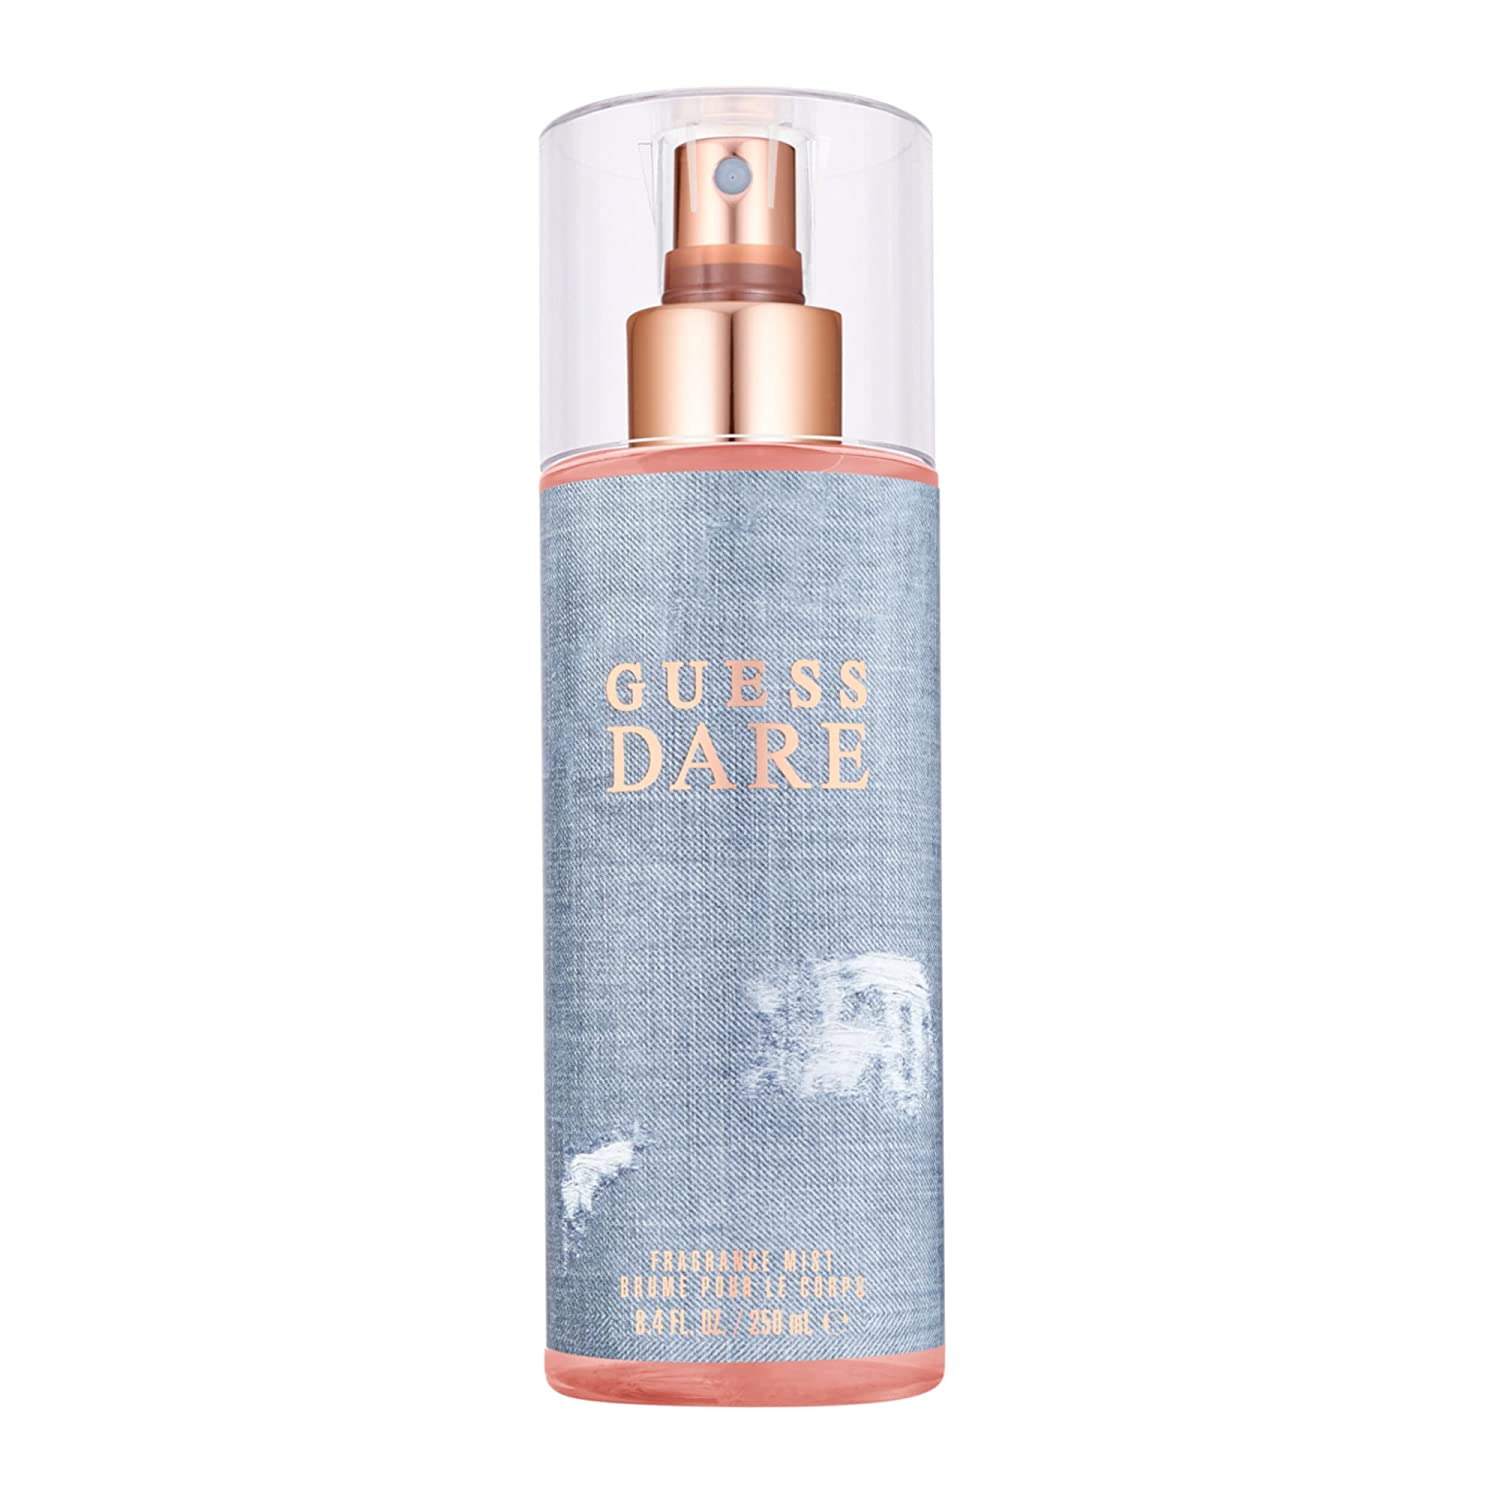 Guess Dare Body Mist - Perfume Planet 